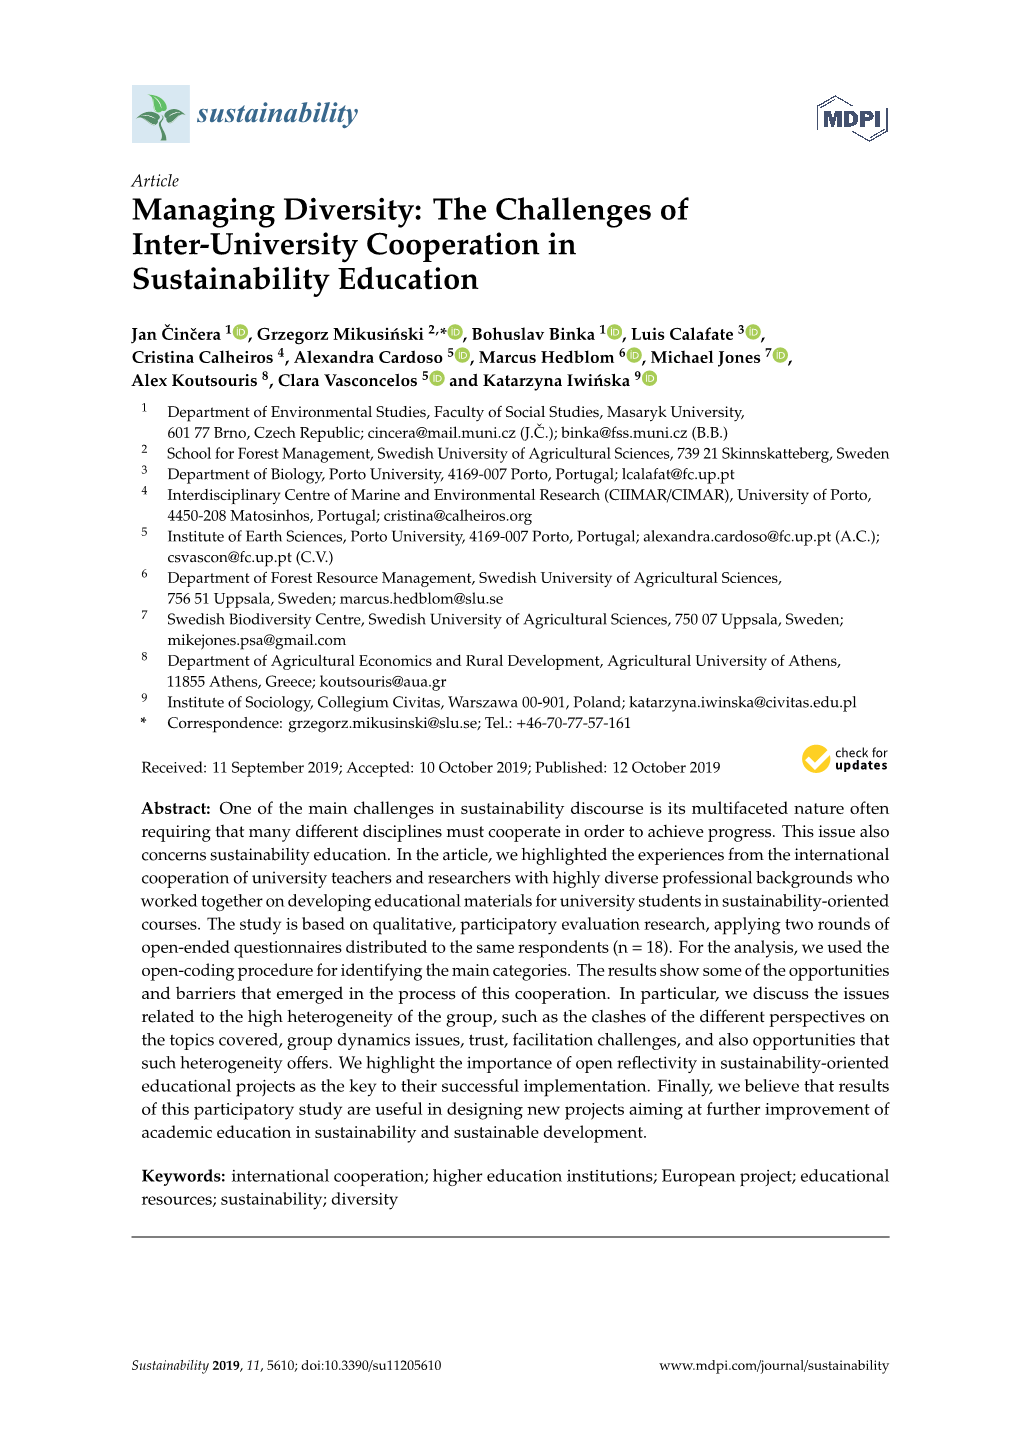 The Challenges of Inter-University Cooperation in Sustainability Education